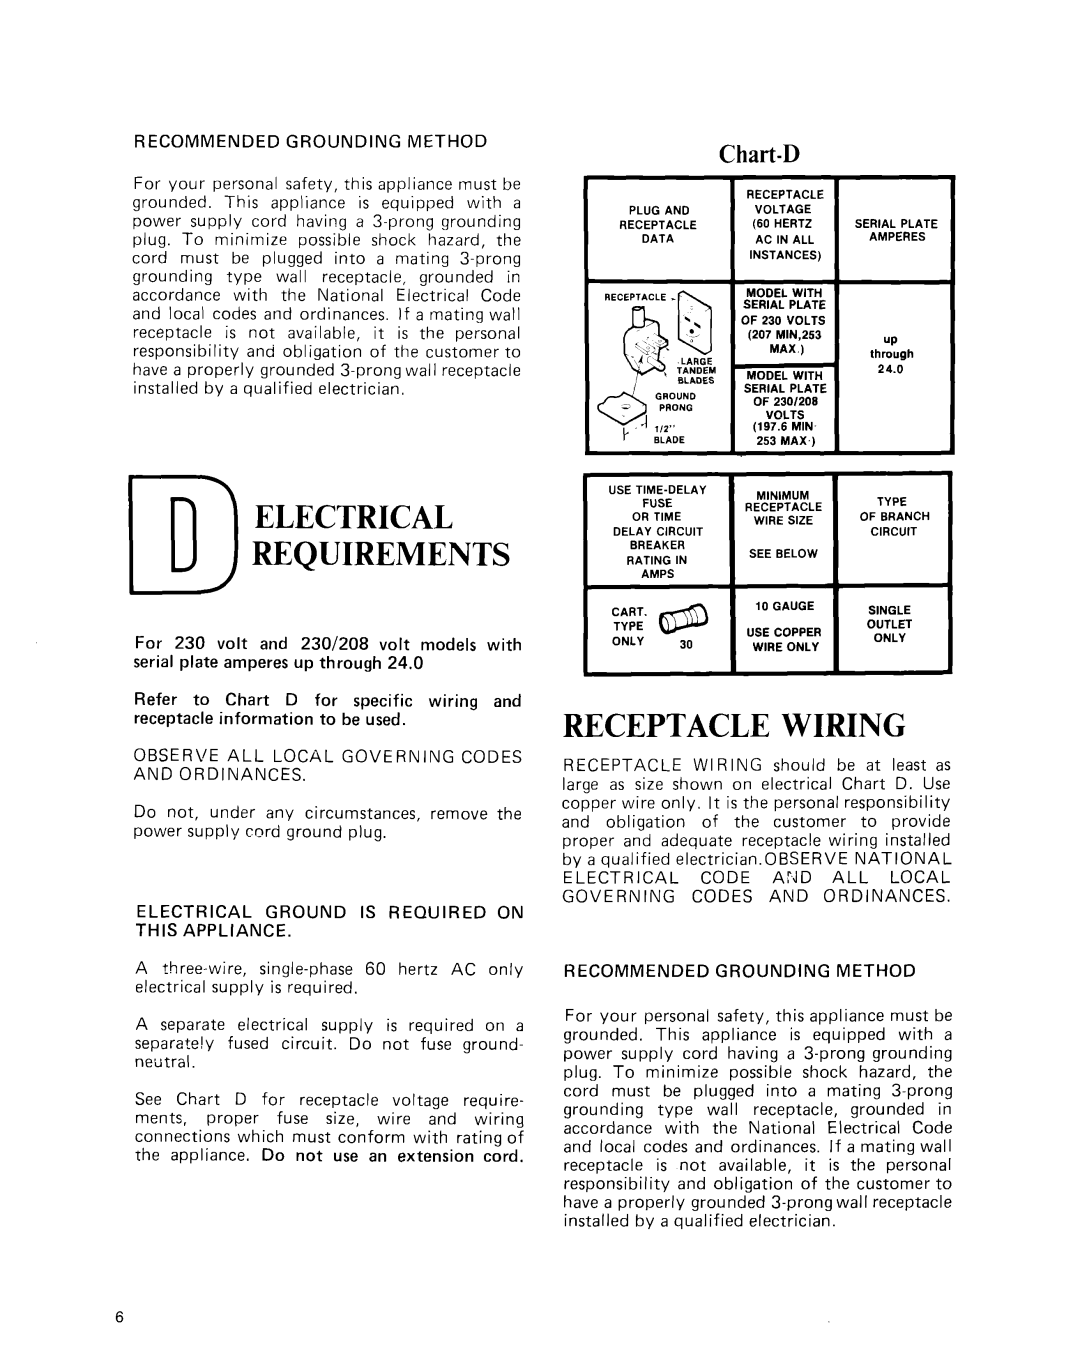 Whirlpool CAW21D2A1 manual Electrical Requirements, Chart-D, Receptacle Wiring 